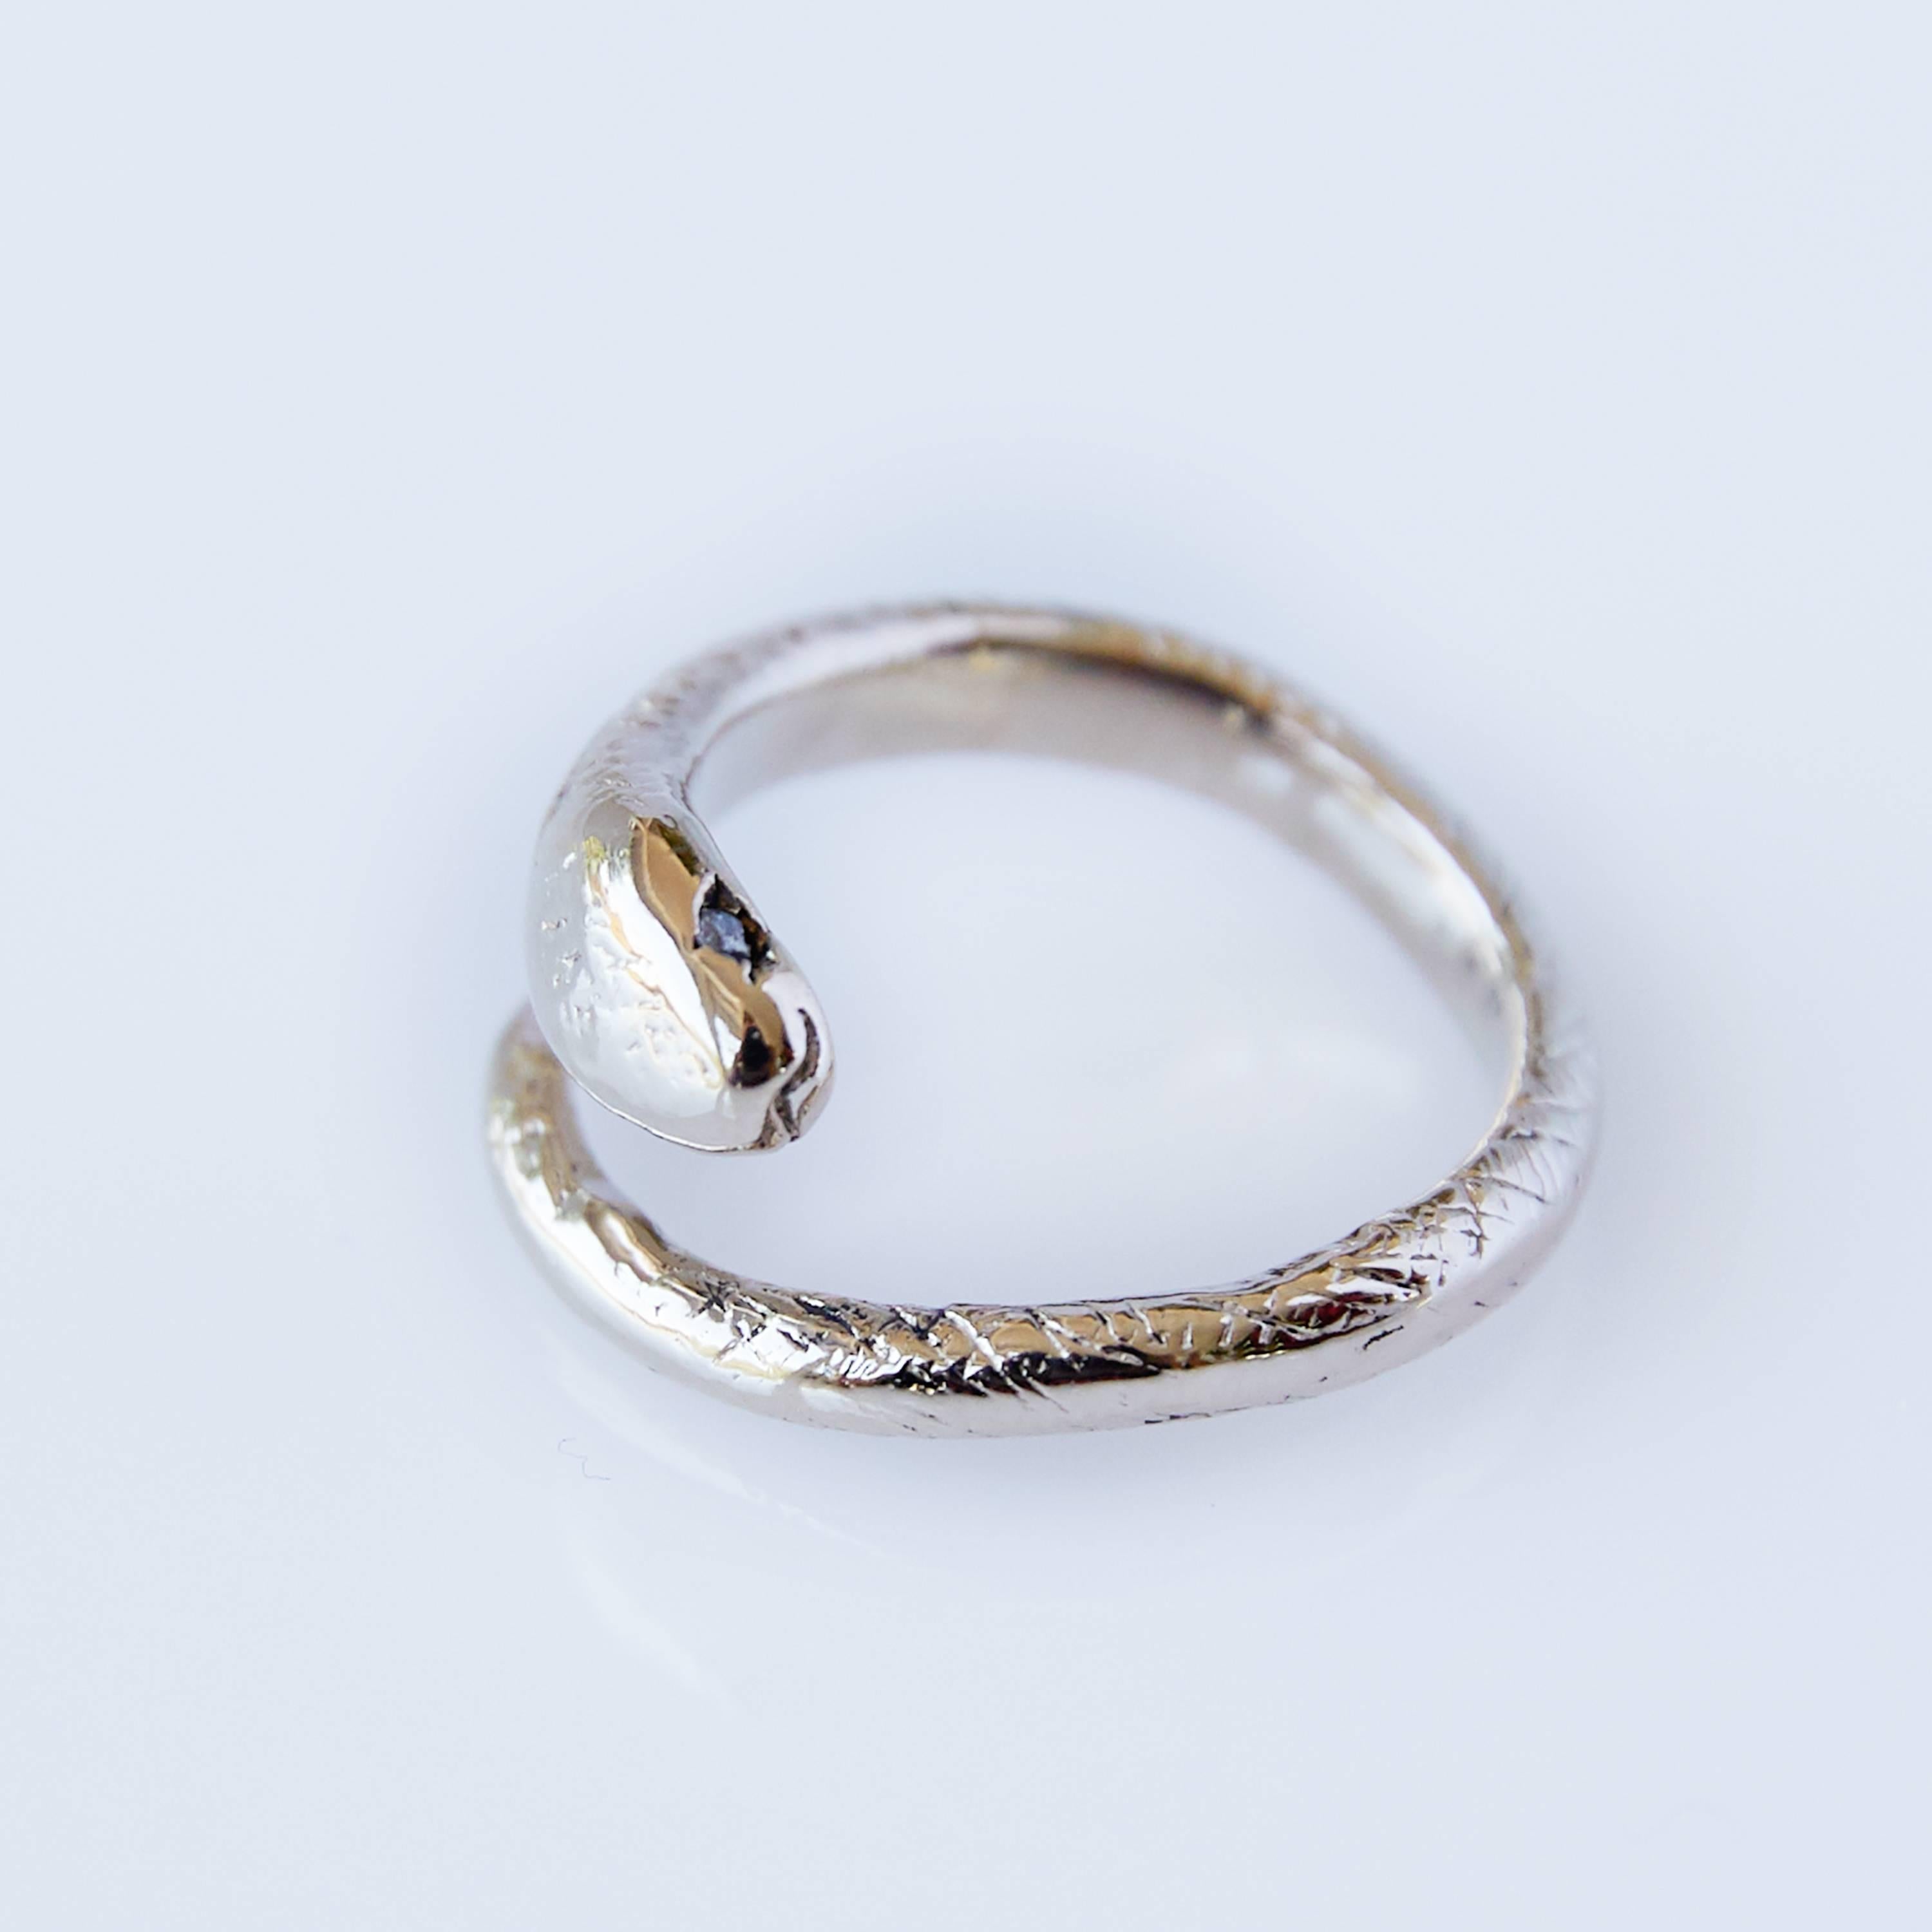 Contemporary Sapphire Snake Ring Bronze Fashion Cocktail Ring Adjustable J Dauphin